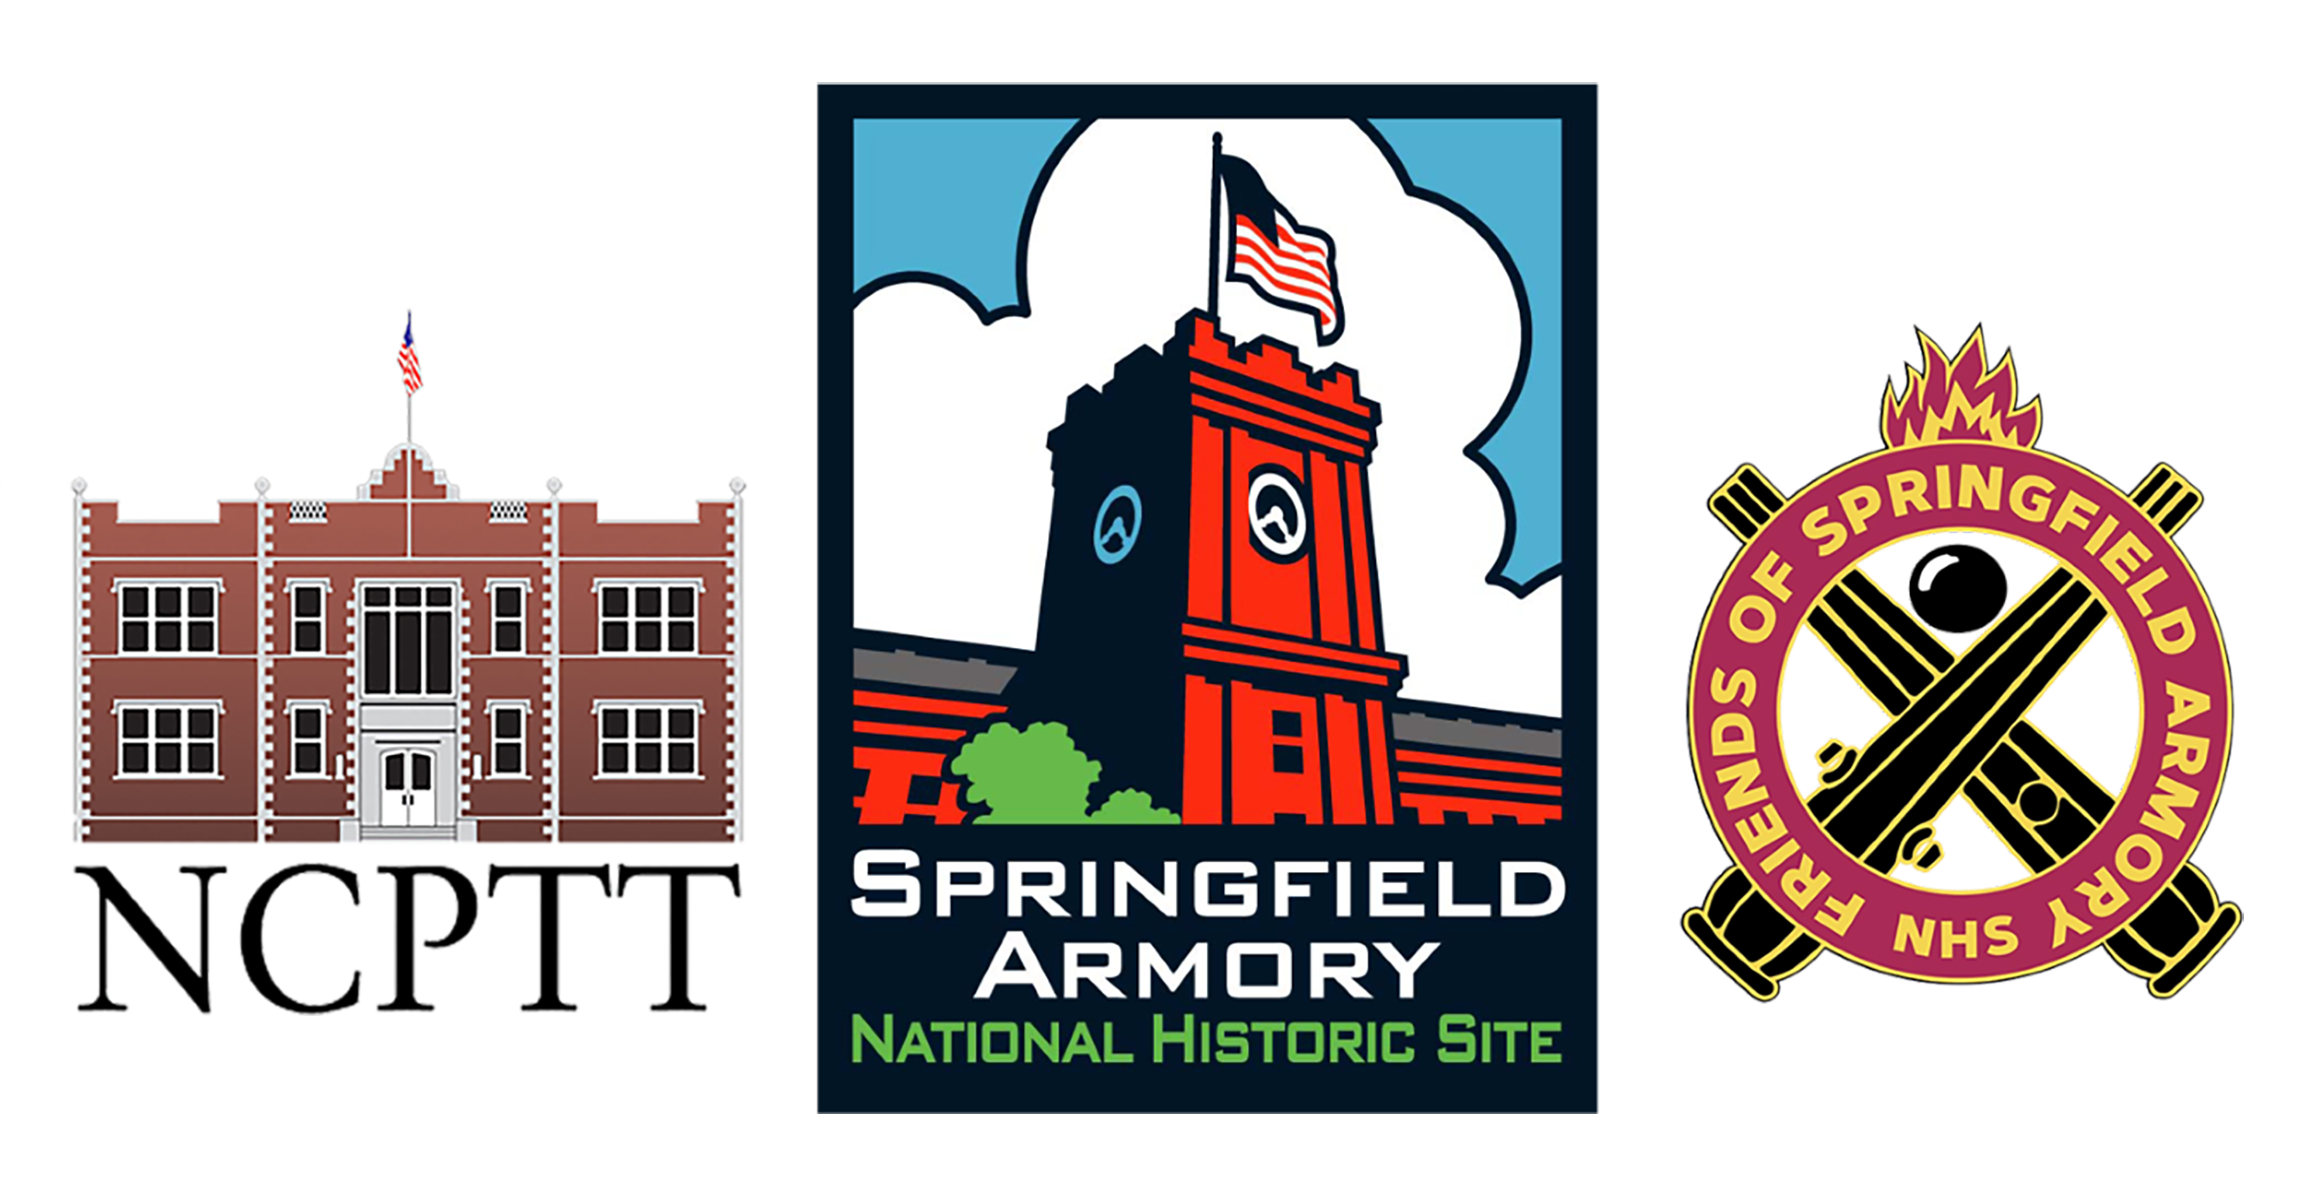 Logos for the National Center for Preservation Technology and Traning, Springfield Armory National Historic Site, and Friends of Springfield Armory